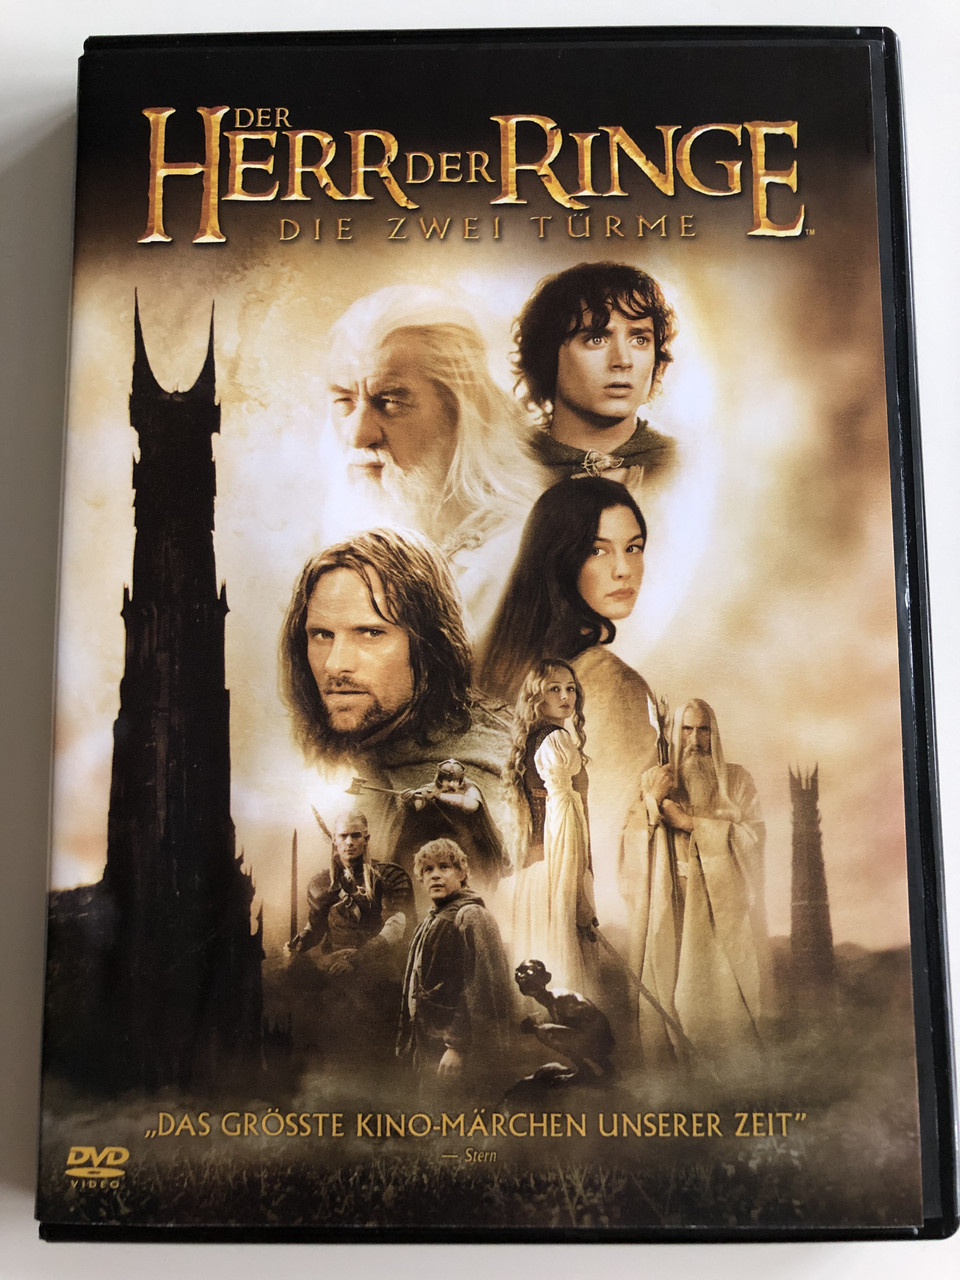  The Lord of the Rings: The Motion Picture Trilogy (The  Fellowship of the Ring / The Two Towers / The Return of the King Extended  Editions) [Blu-ray] : Elijah Wood, Viggo